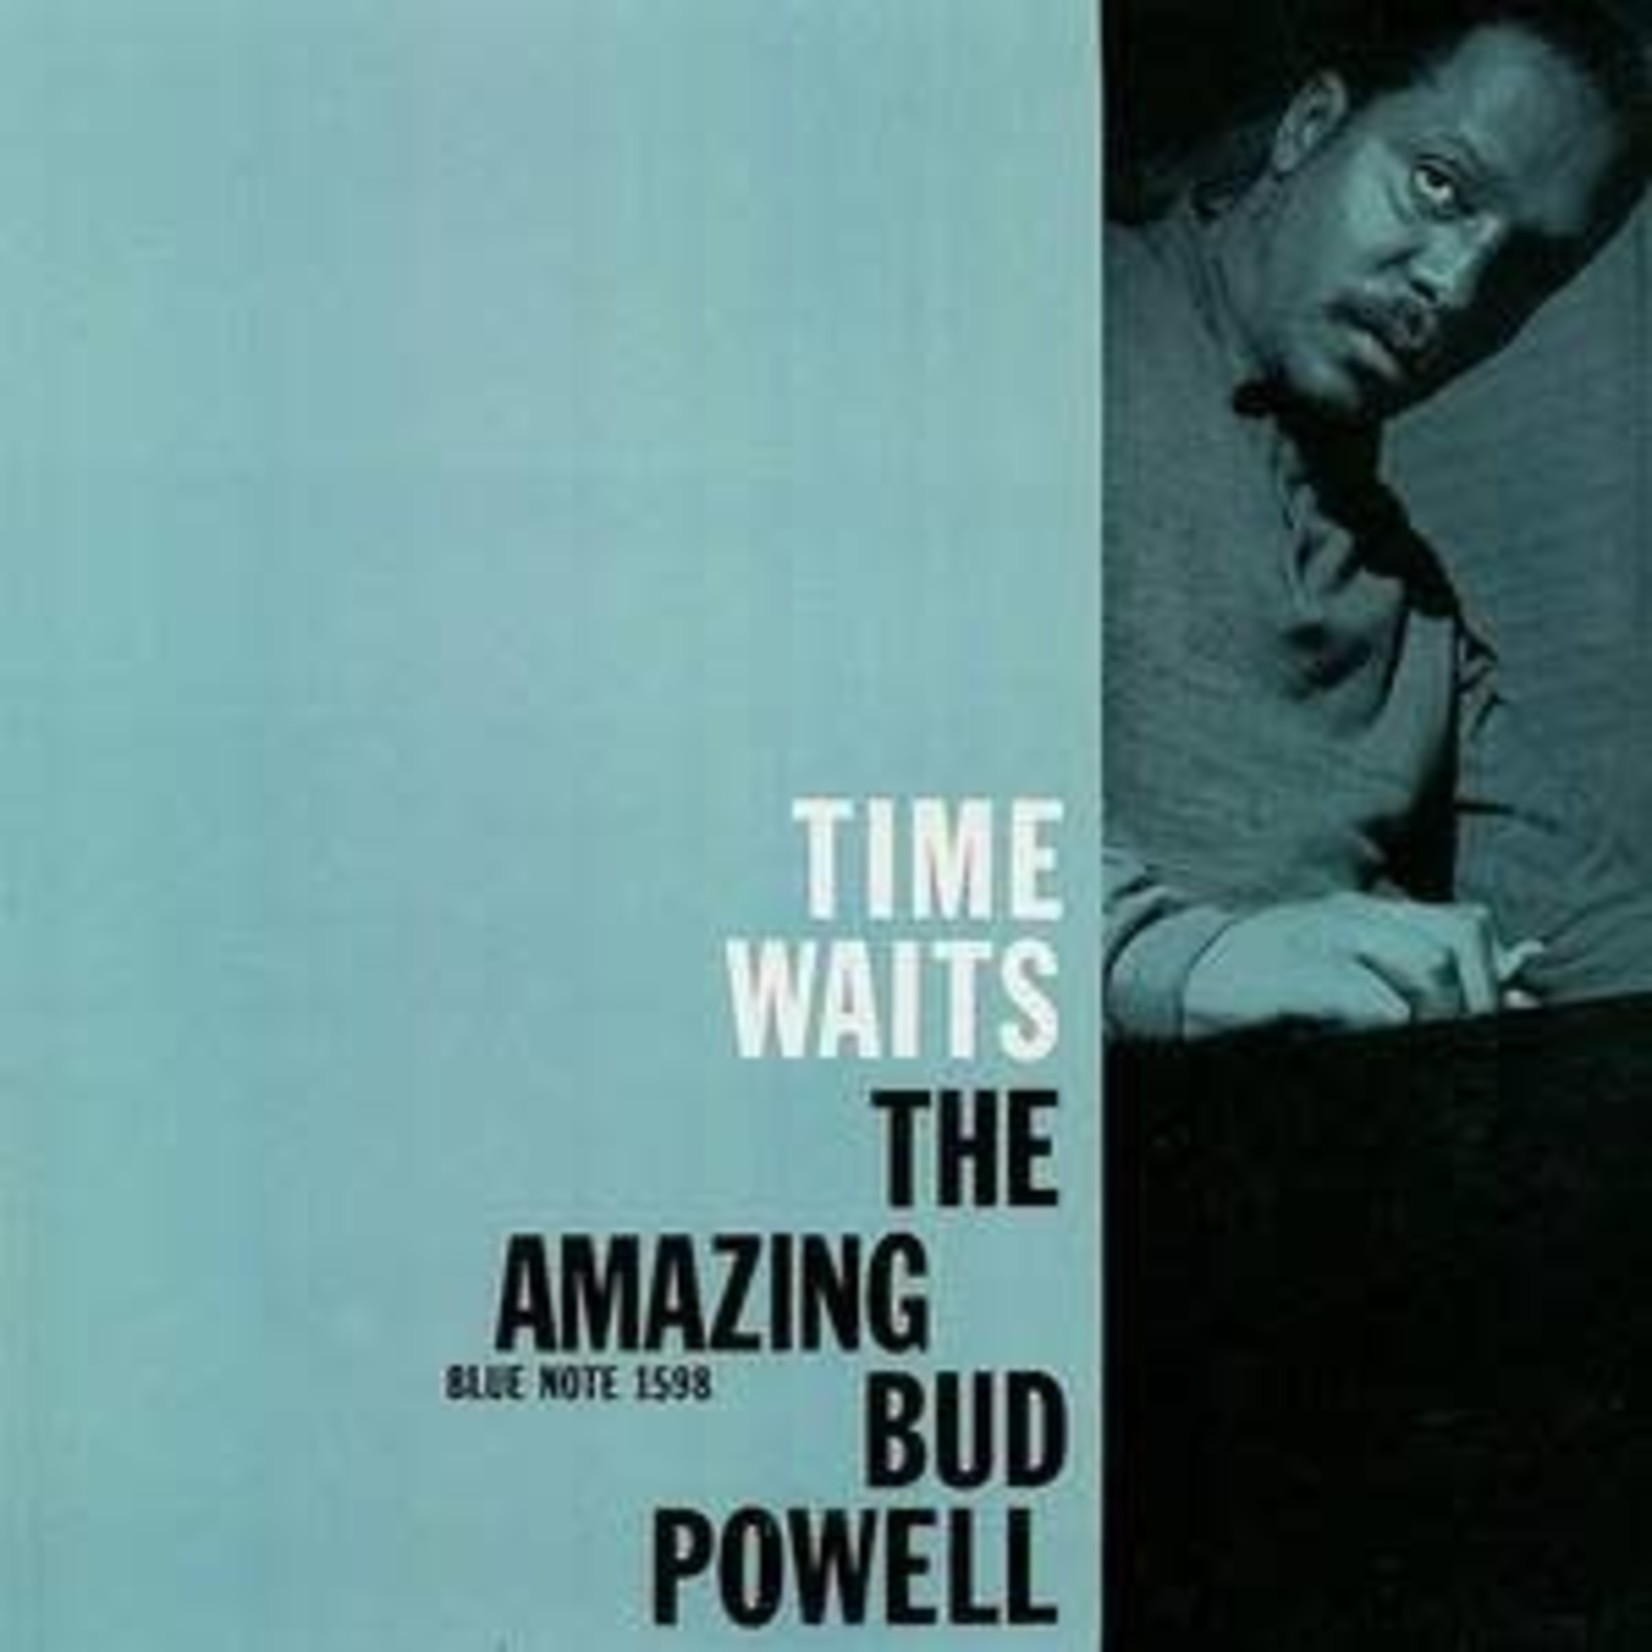 [New] Bud Powell - Time Waits: The Amazing Bud Powell Vol.4 (Blue Note Classic Vinyl series)